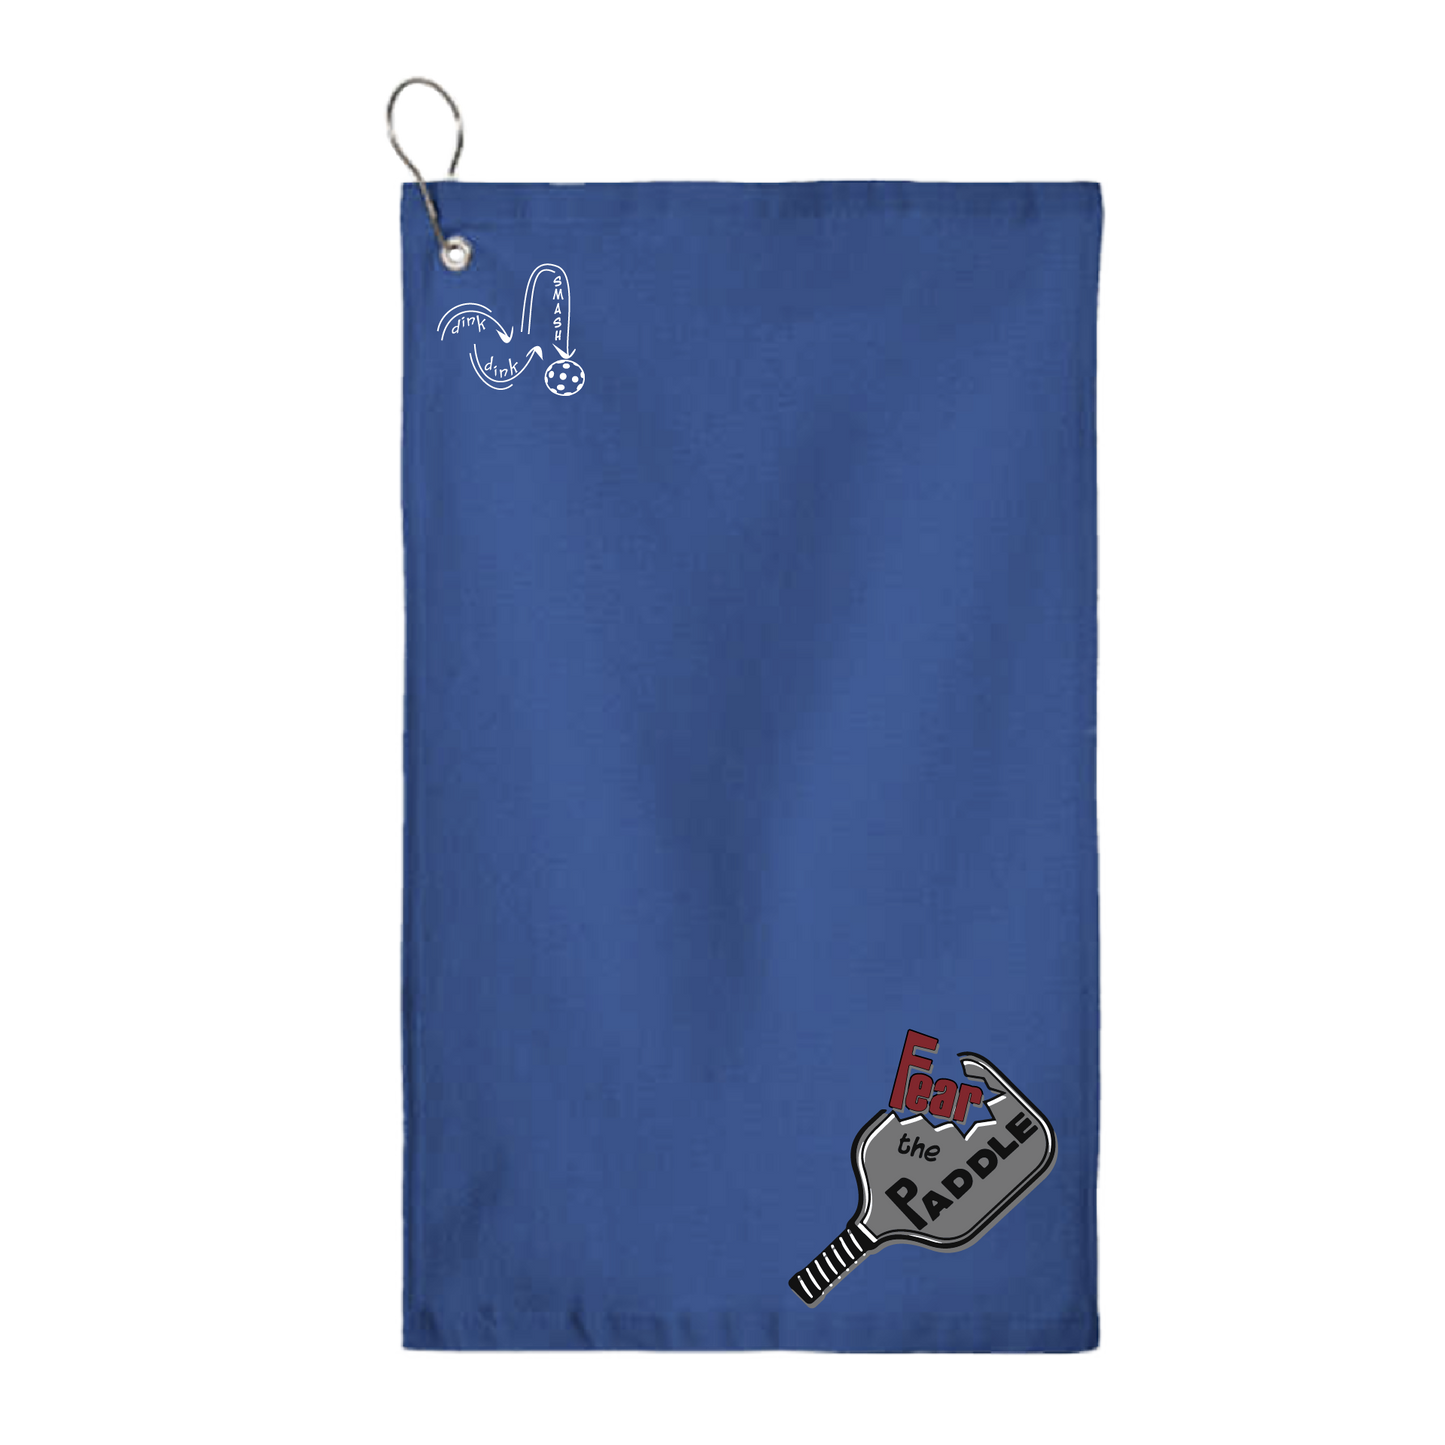 This Fear the Paddle pickleball towel is crafted with cotton terry velour for optimal performance. It features grommets, hooks, and hemmed edges for added durability. It's perfect for completing your pickleball gear, and an ideal gift for friends and tournaments. The towel is designed to be both absorbent and lightweight, so you can remain dry and comfortable while you play.